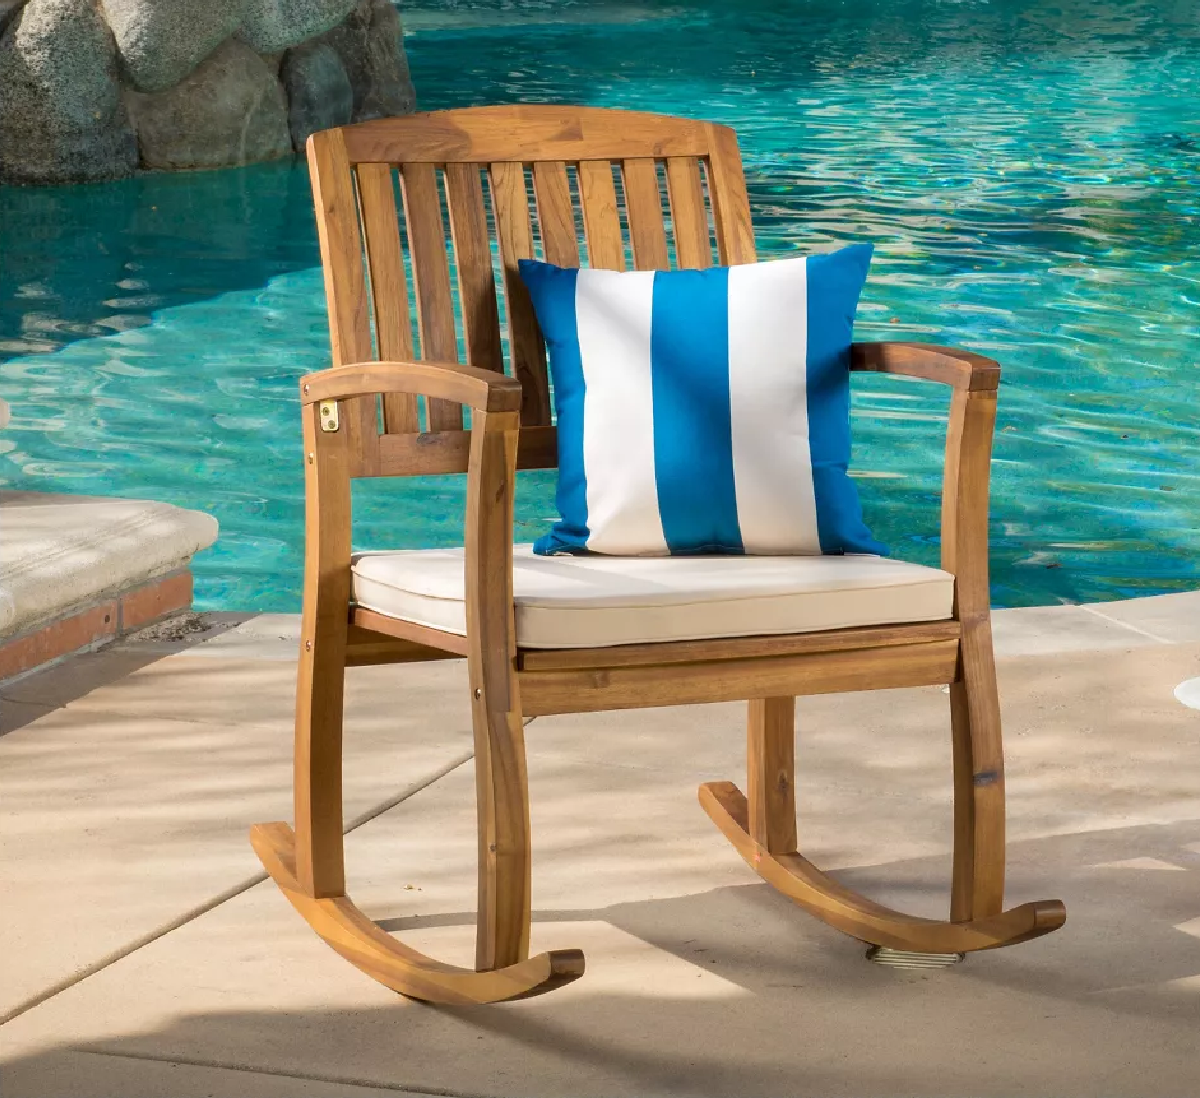 Acacia Outdoor Rocking Chair for the patio